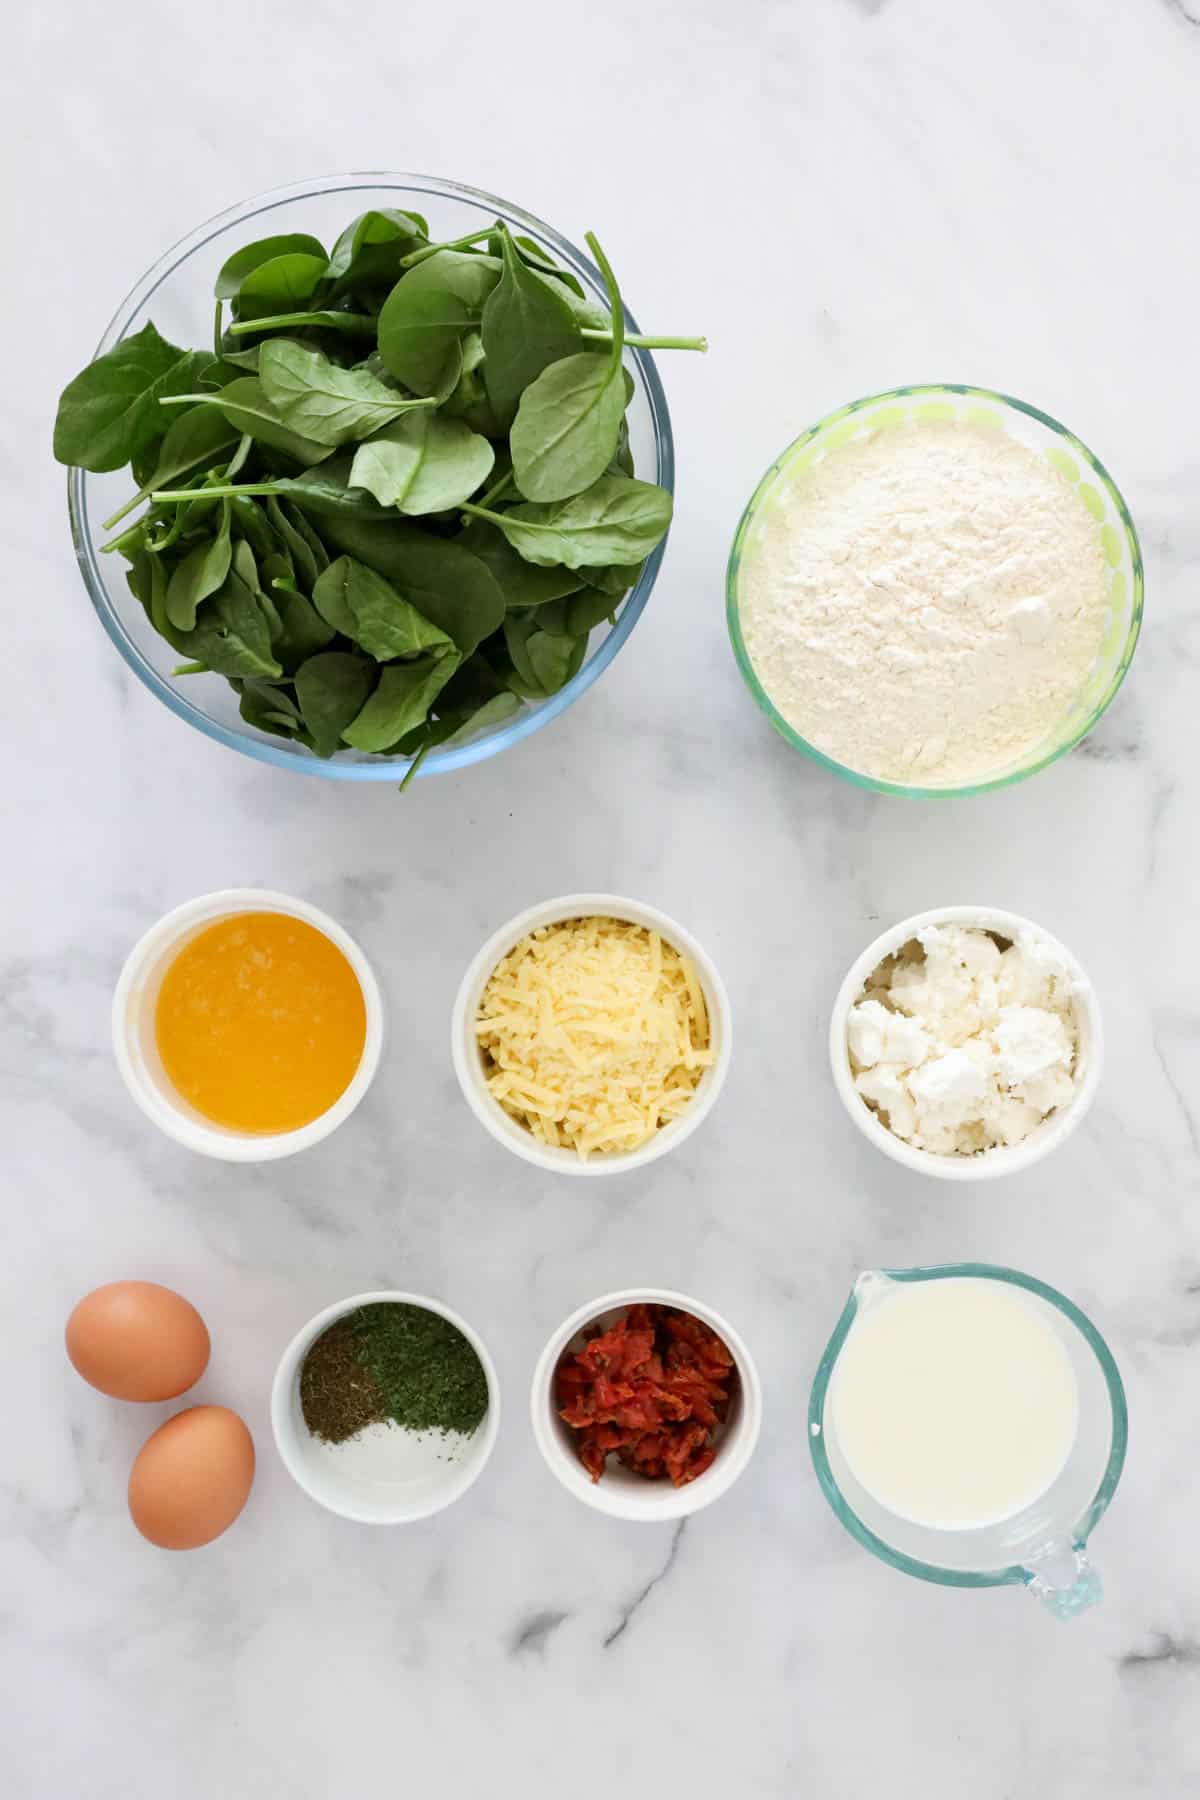 Ingredients needed to make spinach feta muffins weighed out and placed in individual bowls.